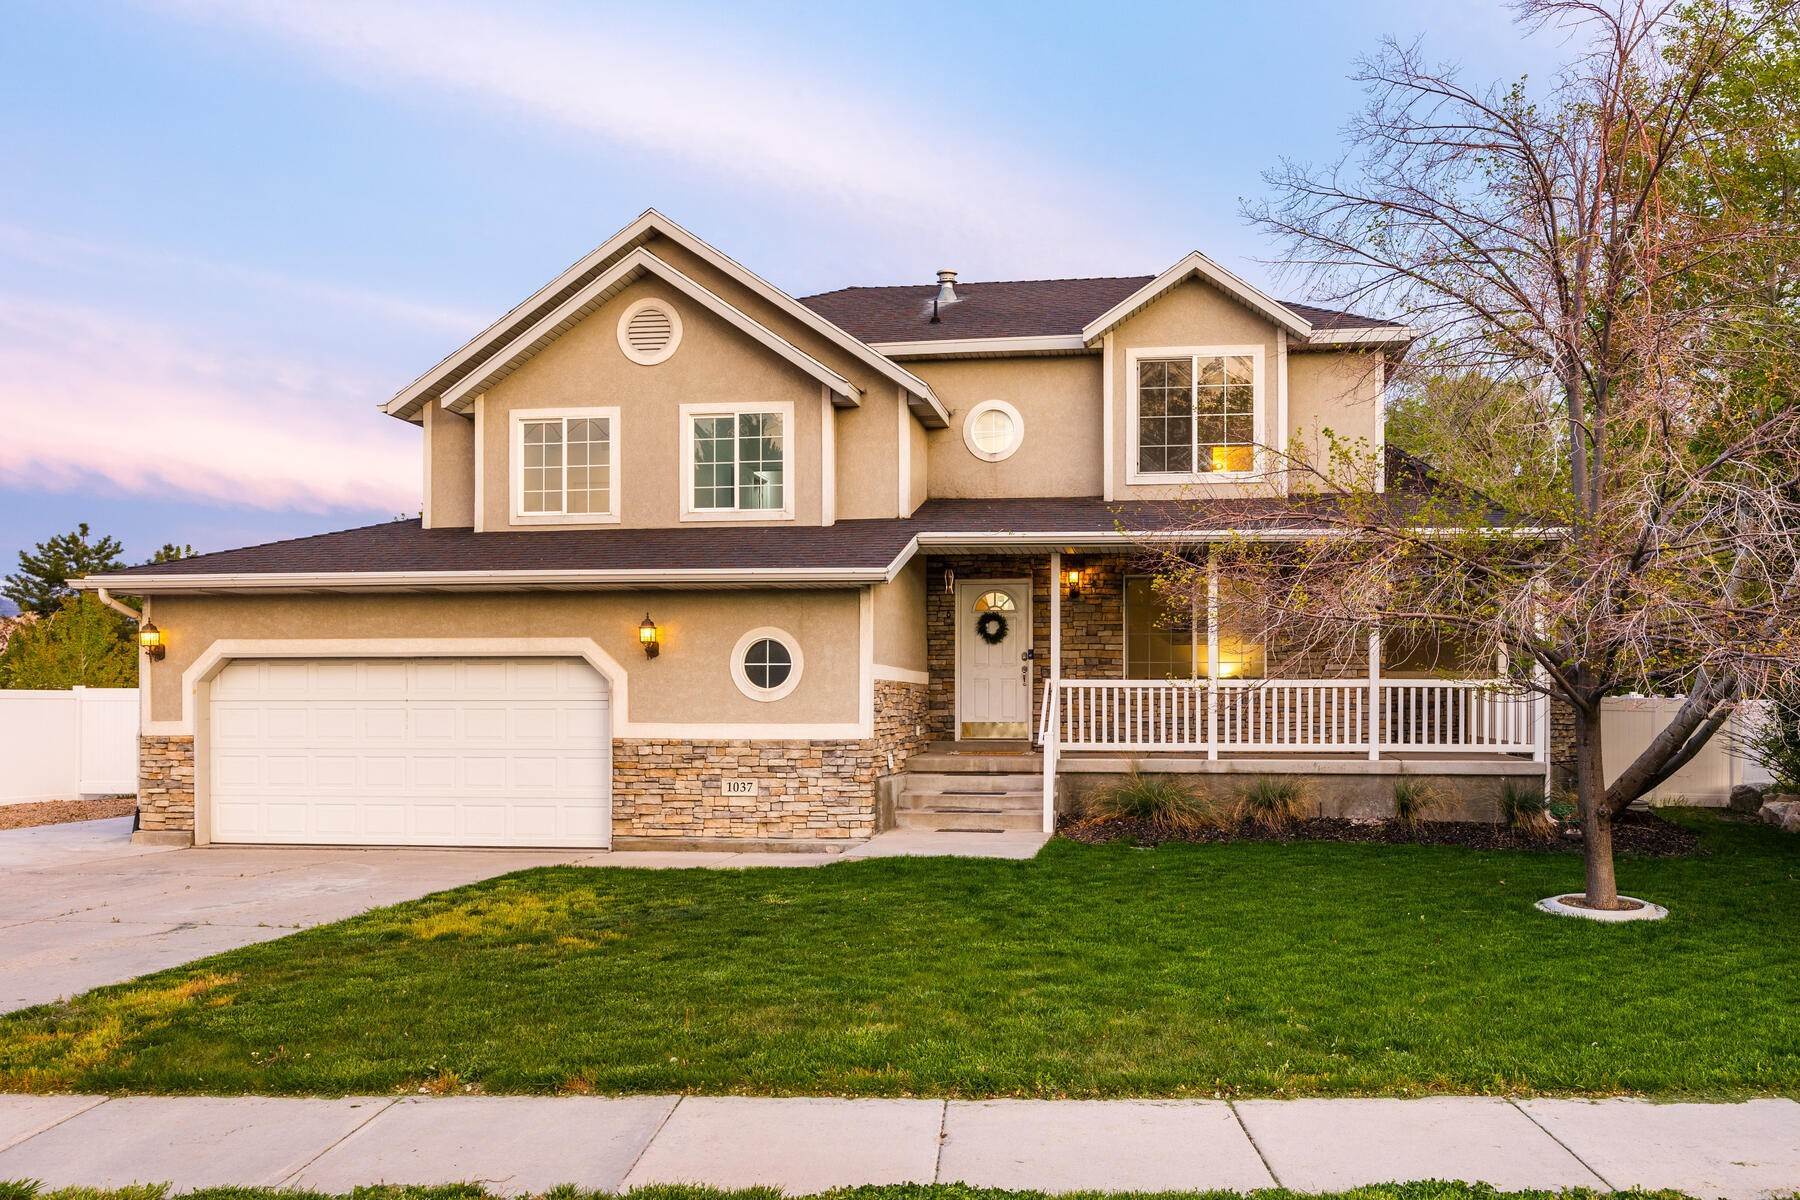 Single Family Homes for Sale at Centrally Located Home with Enough Space For All Your People and Pets 1037 W 4800 S Taylorsville, Utah 84123 United States